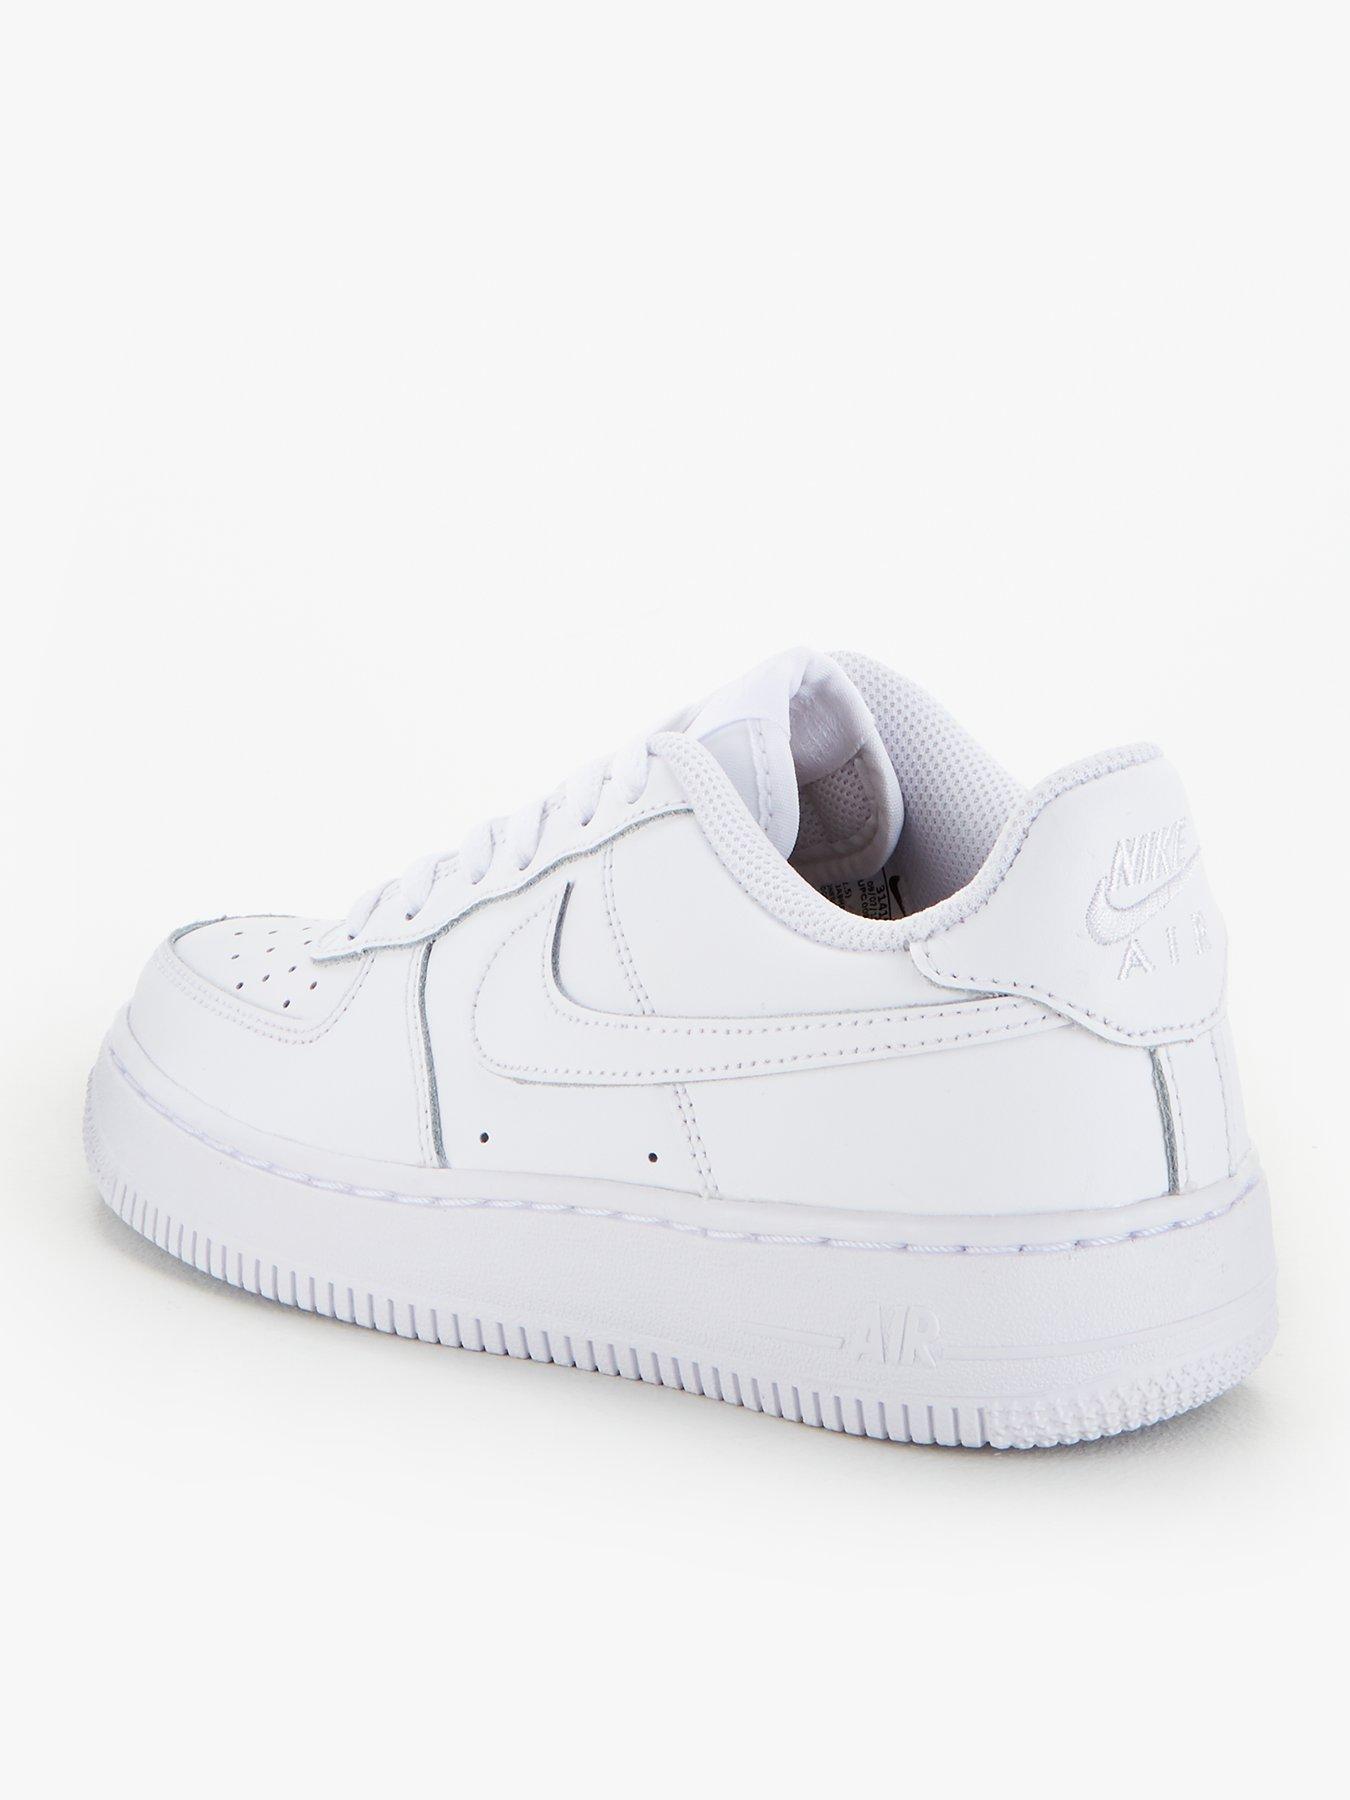 junior air force 1 size 4